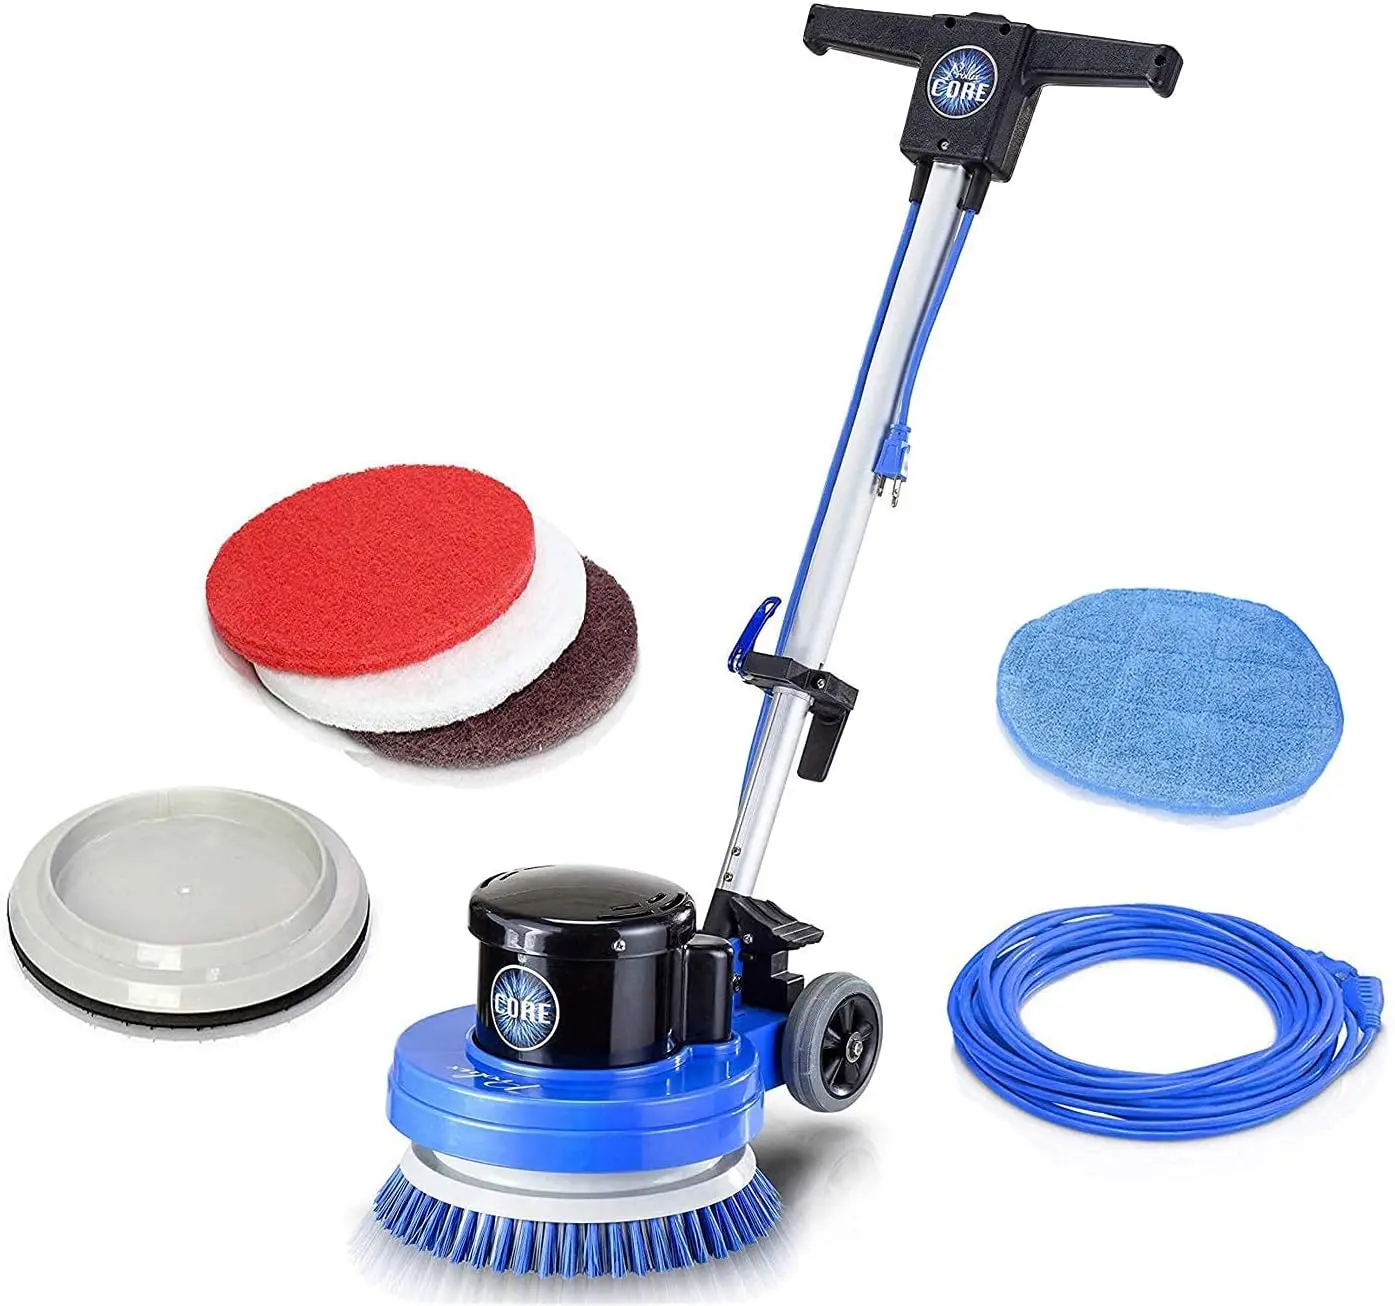 

Prolux Core Floor Buffer - Heavy Duty Single Pad Commercial Floor Polisher and Tile Scrubber